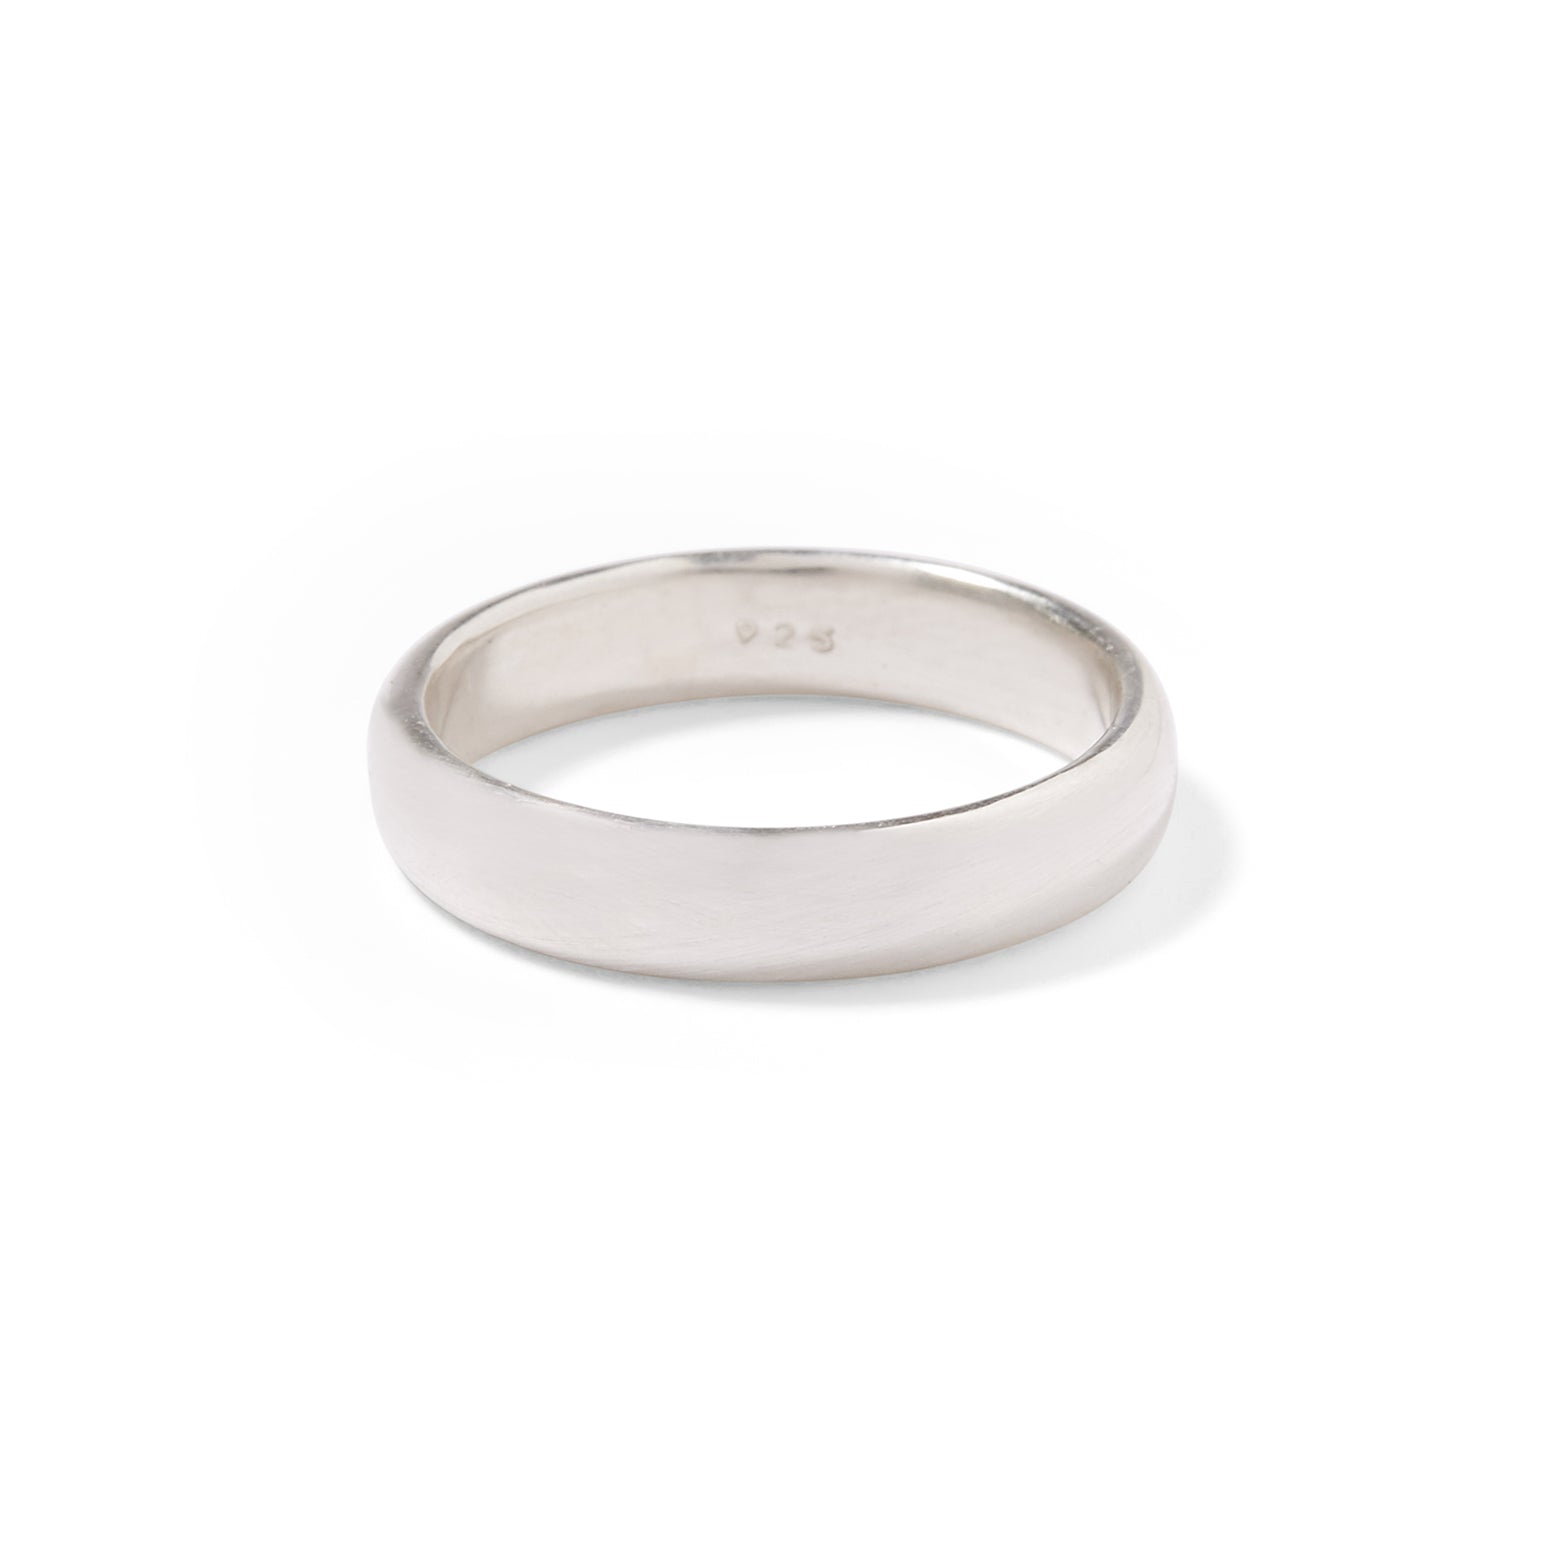 Sterling silver 4.5mm gents half round band